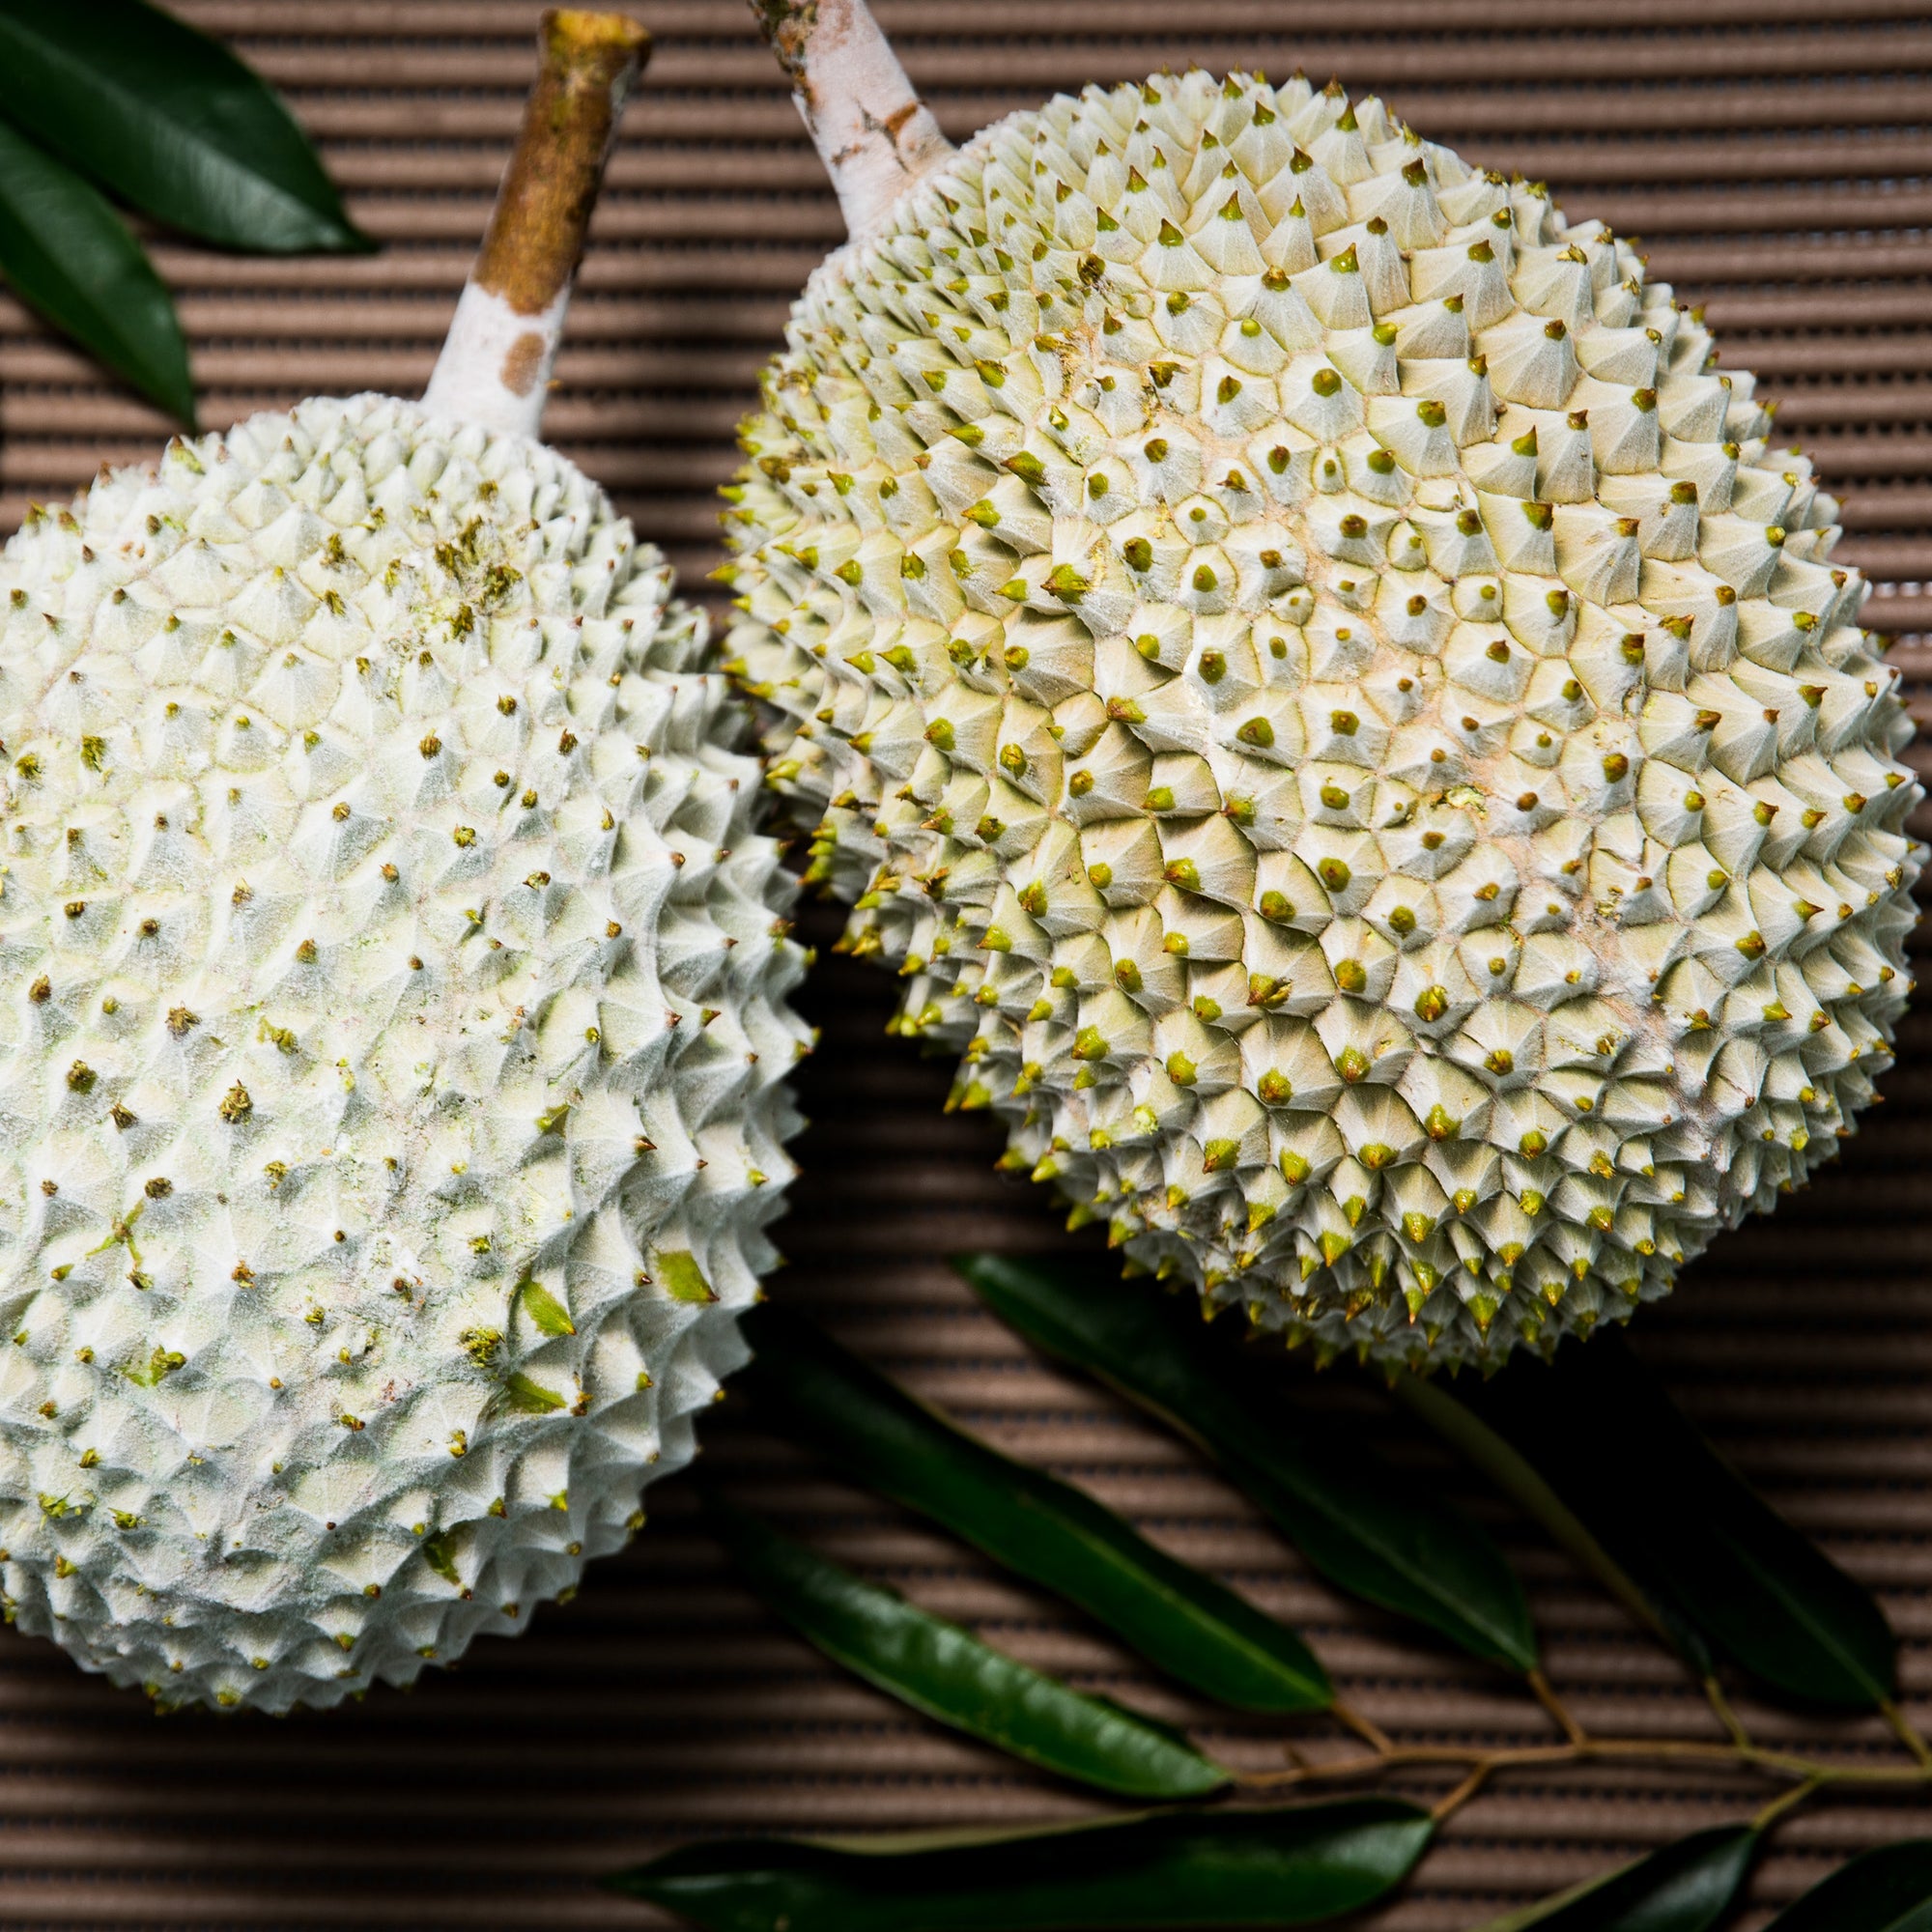 10KG - Musang King Durian With Shell